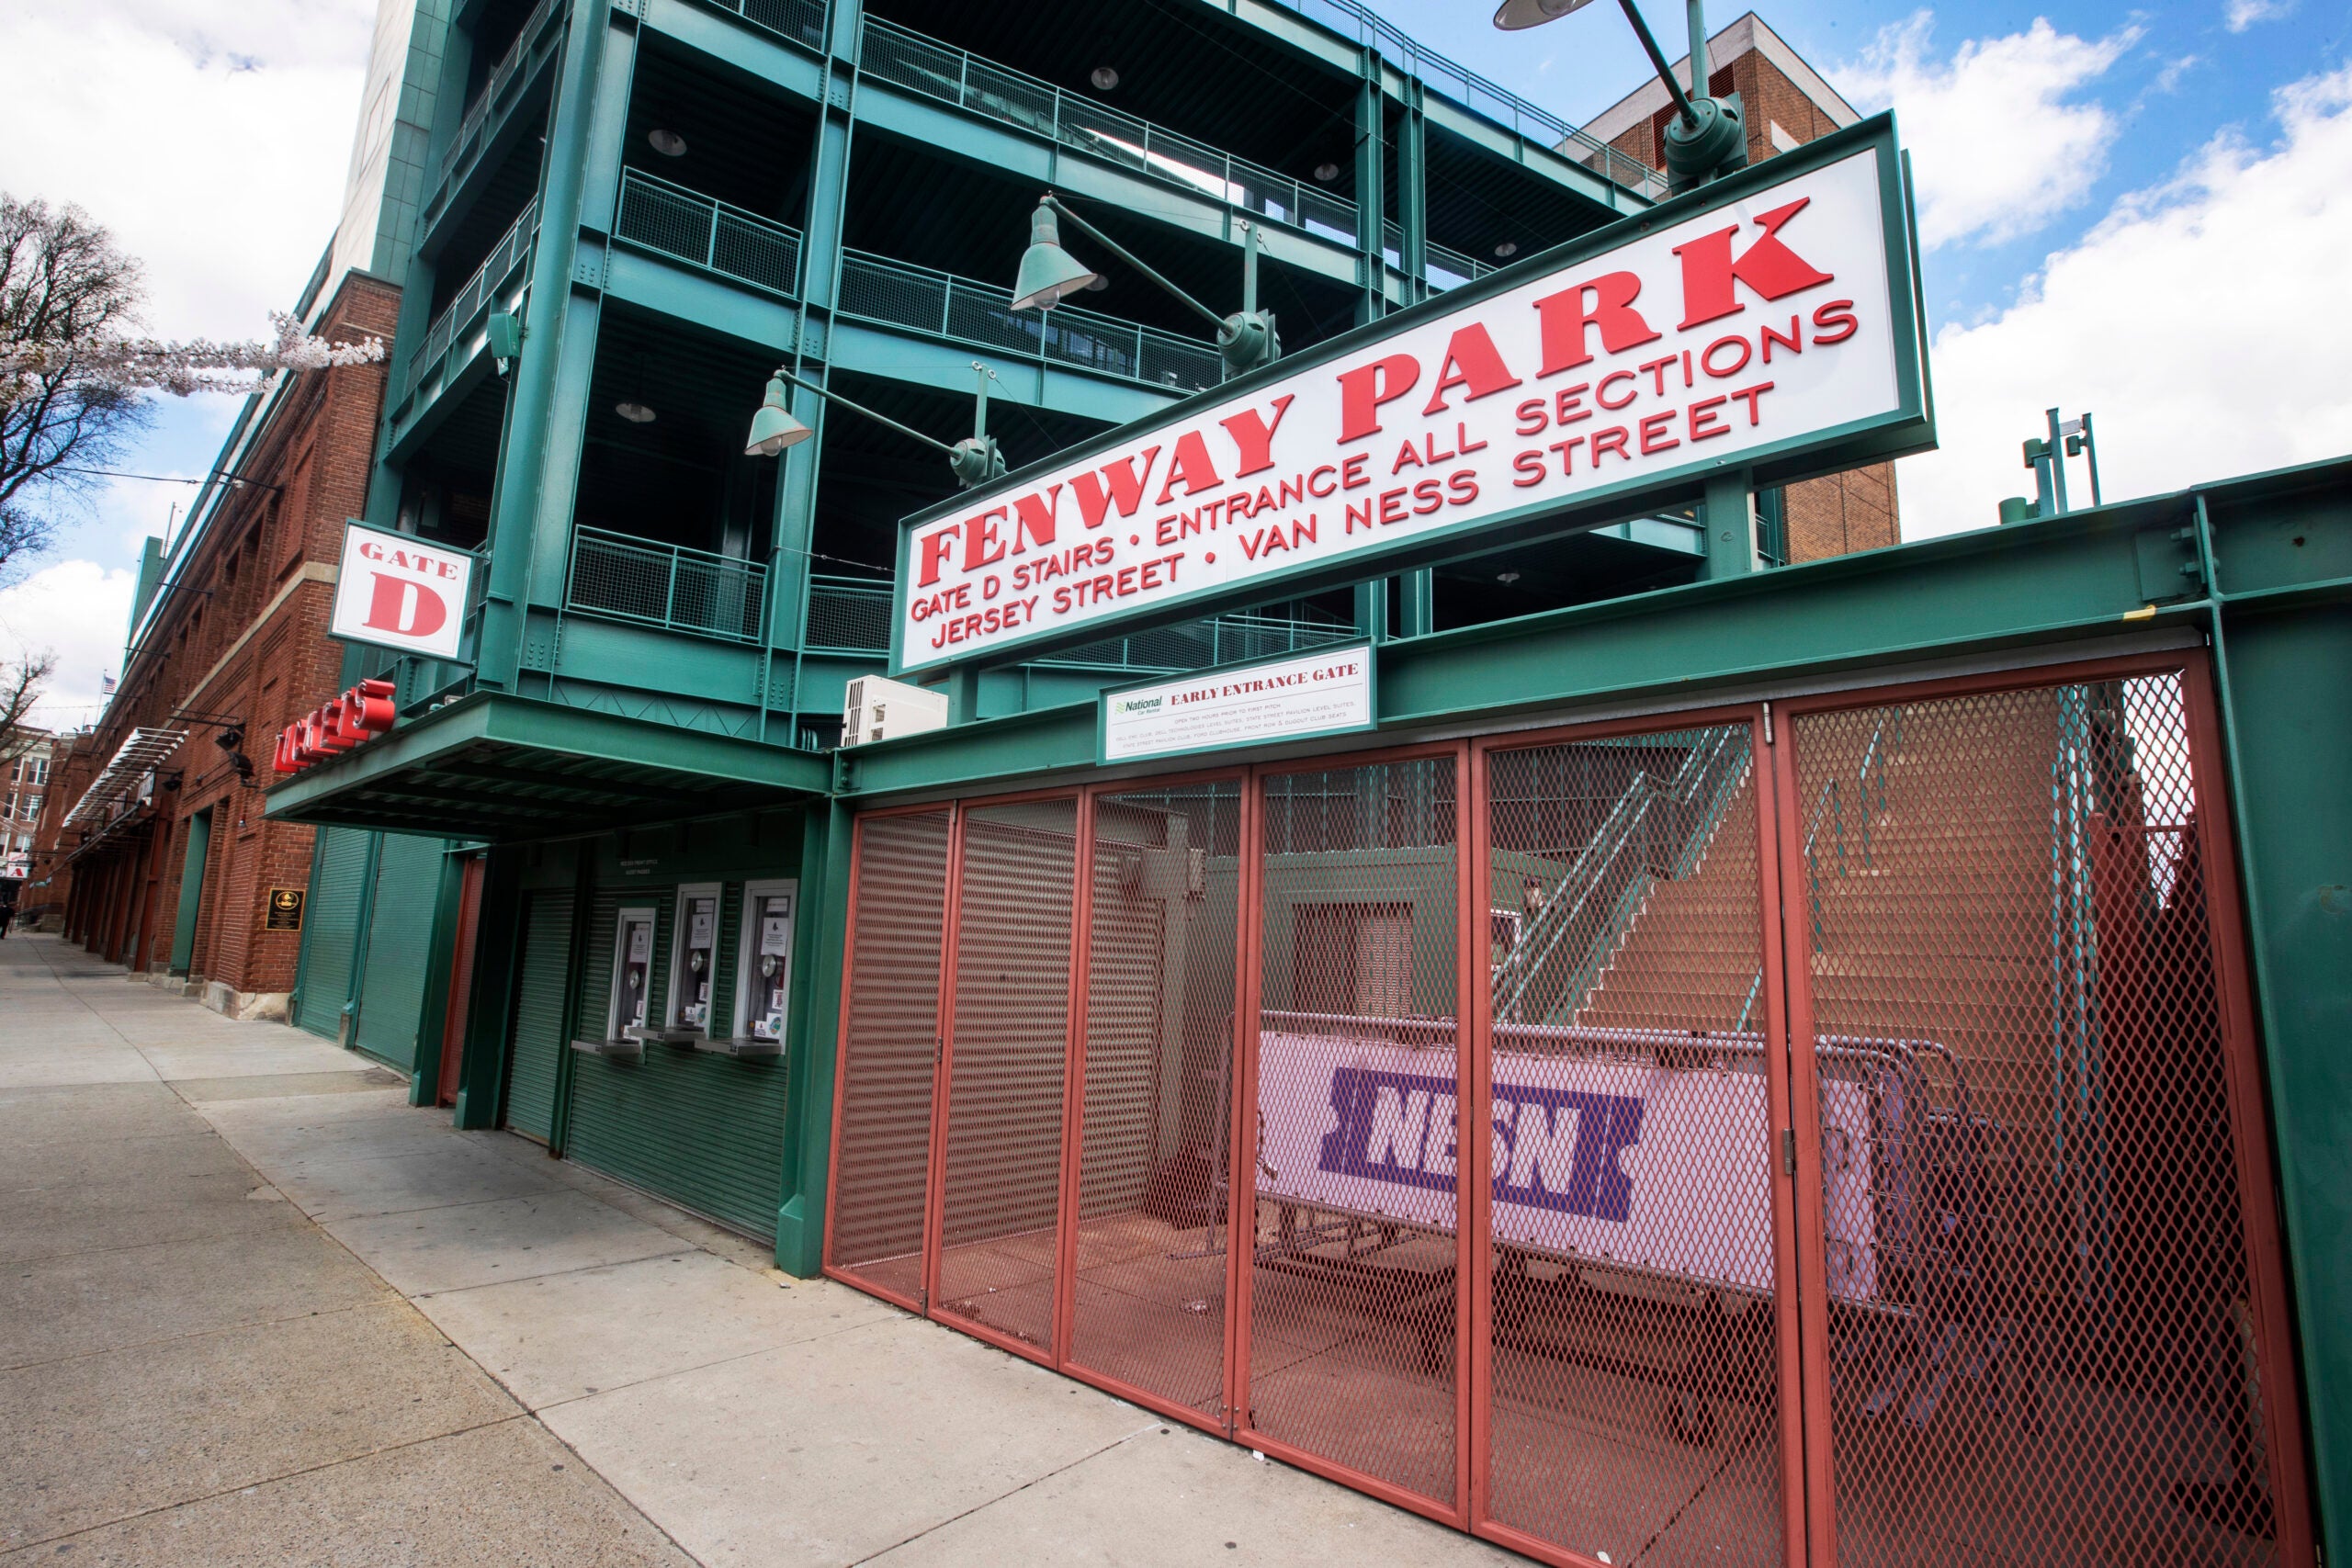 The entrance to Fenway Park in Boston, Massachusetts.